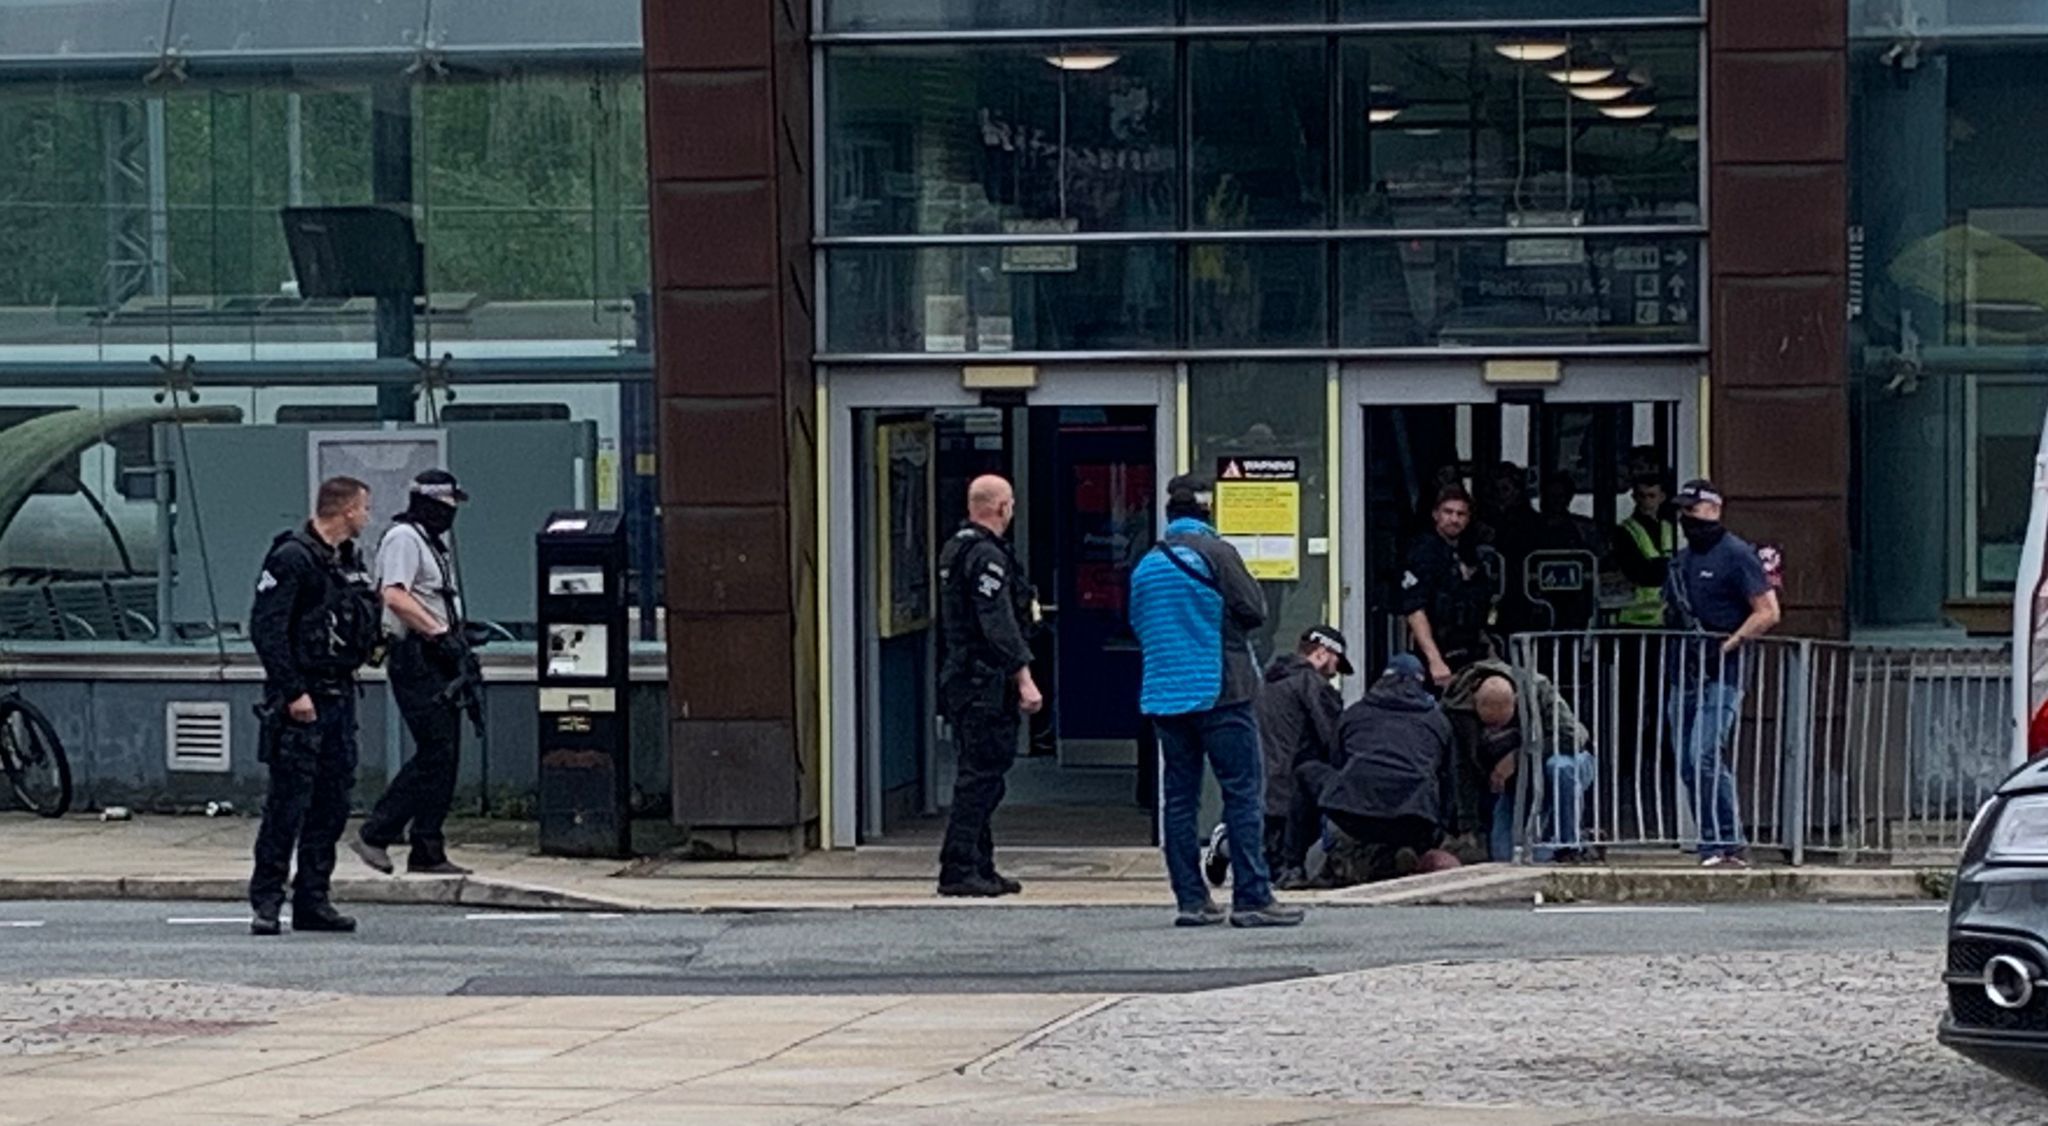 Officers detained a man outside the station